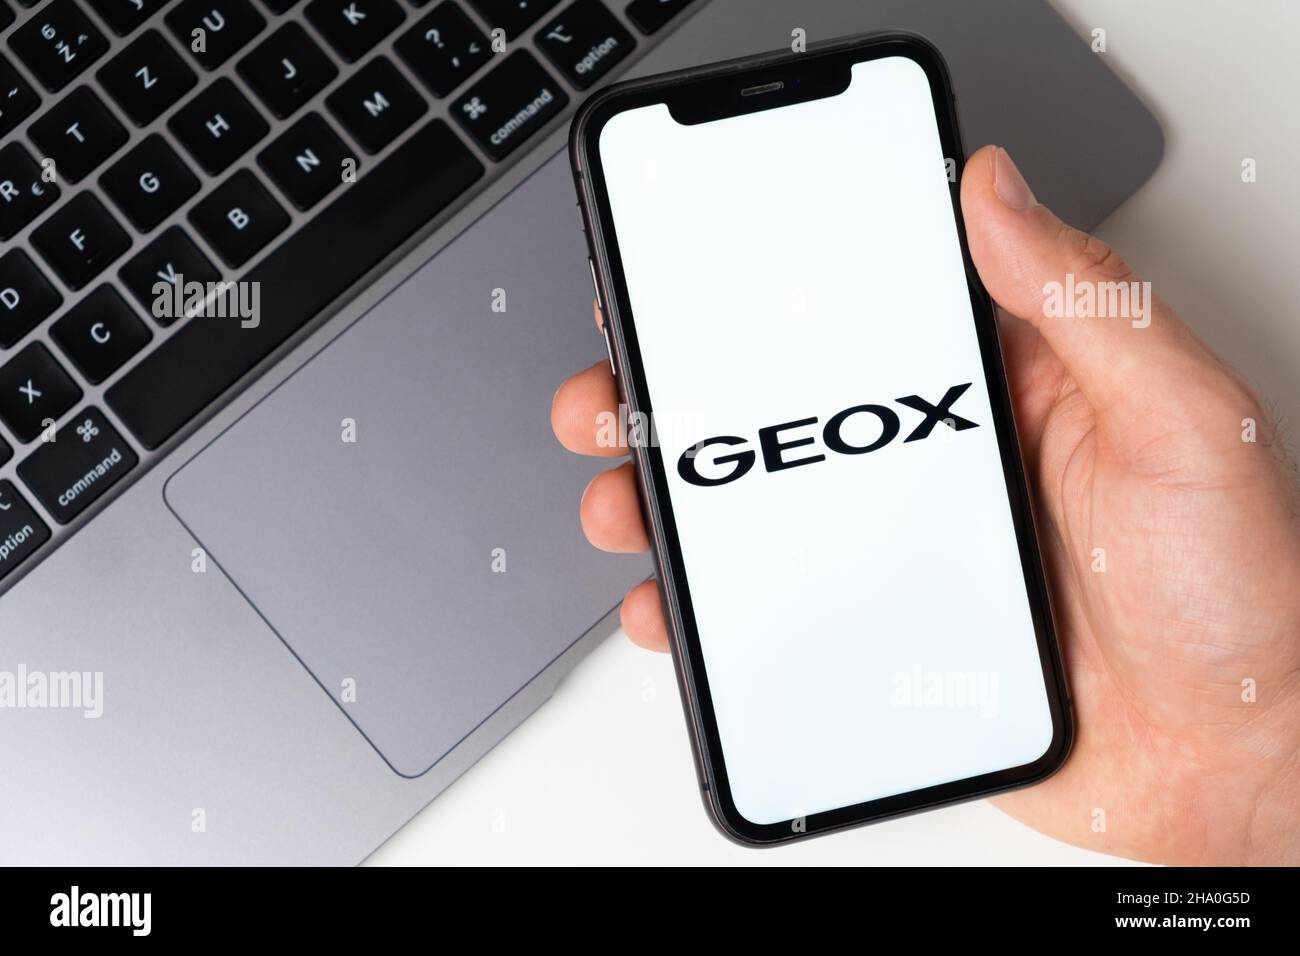 Geox Store High Resolution Stock Photography and Images - Alamy